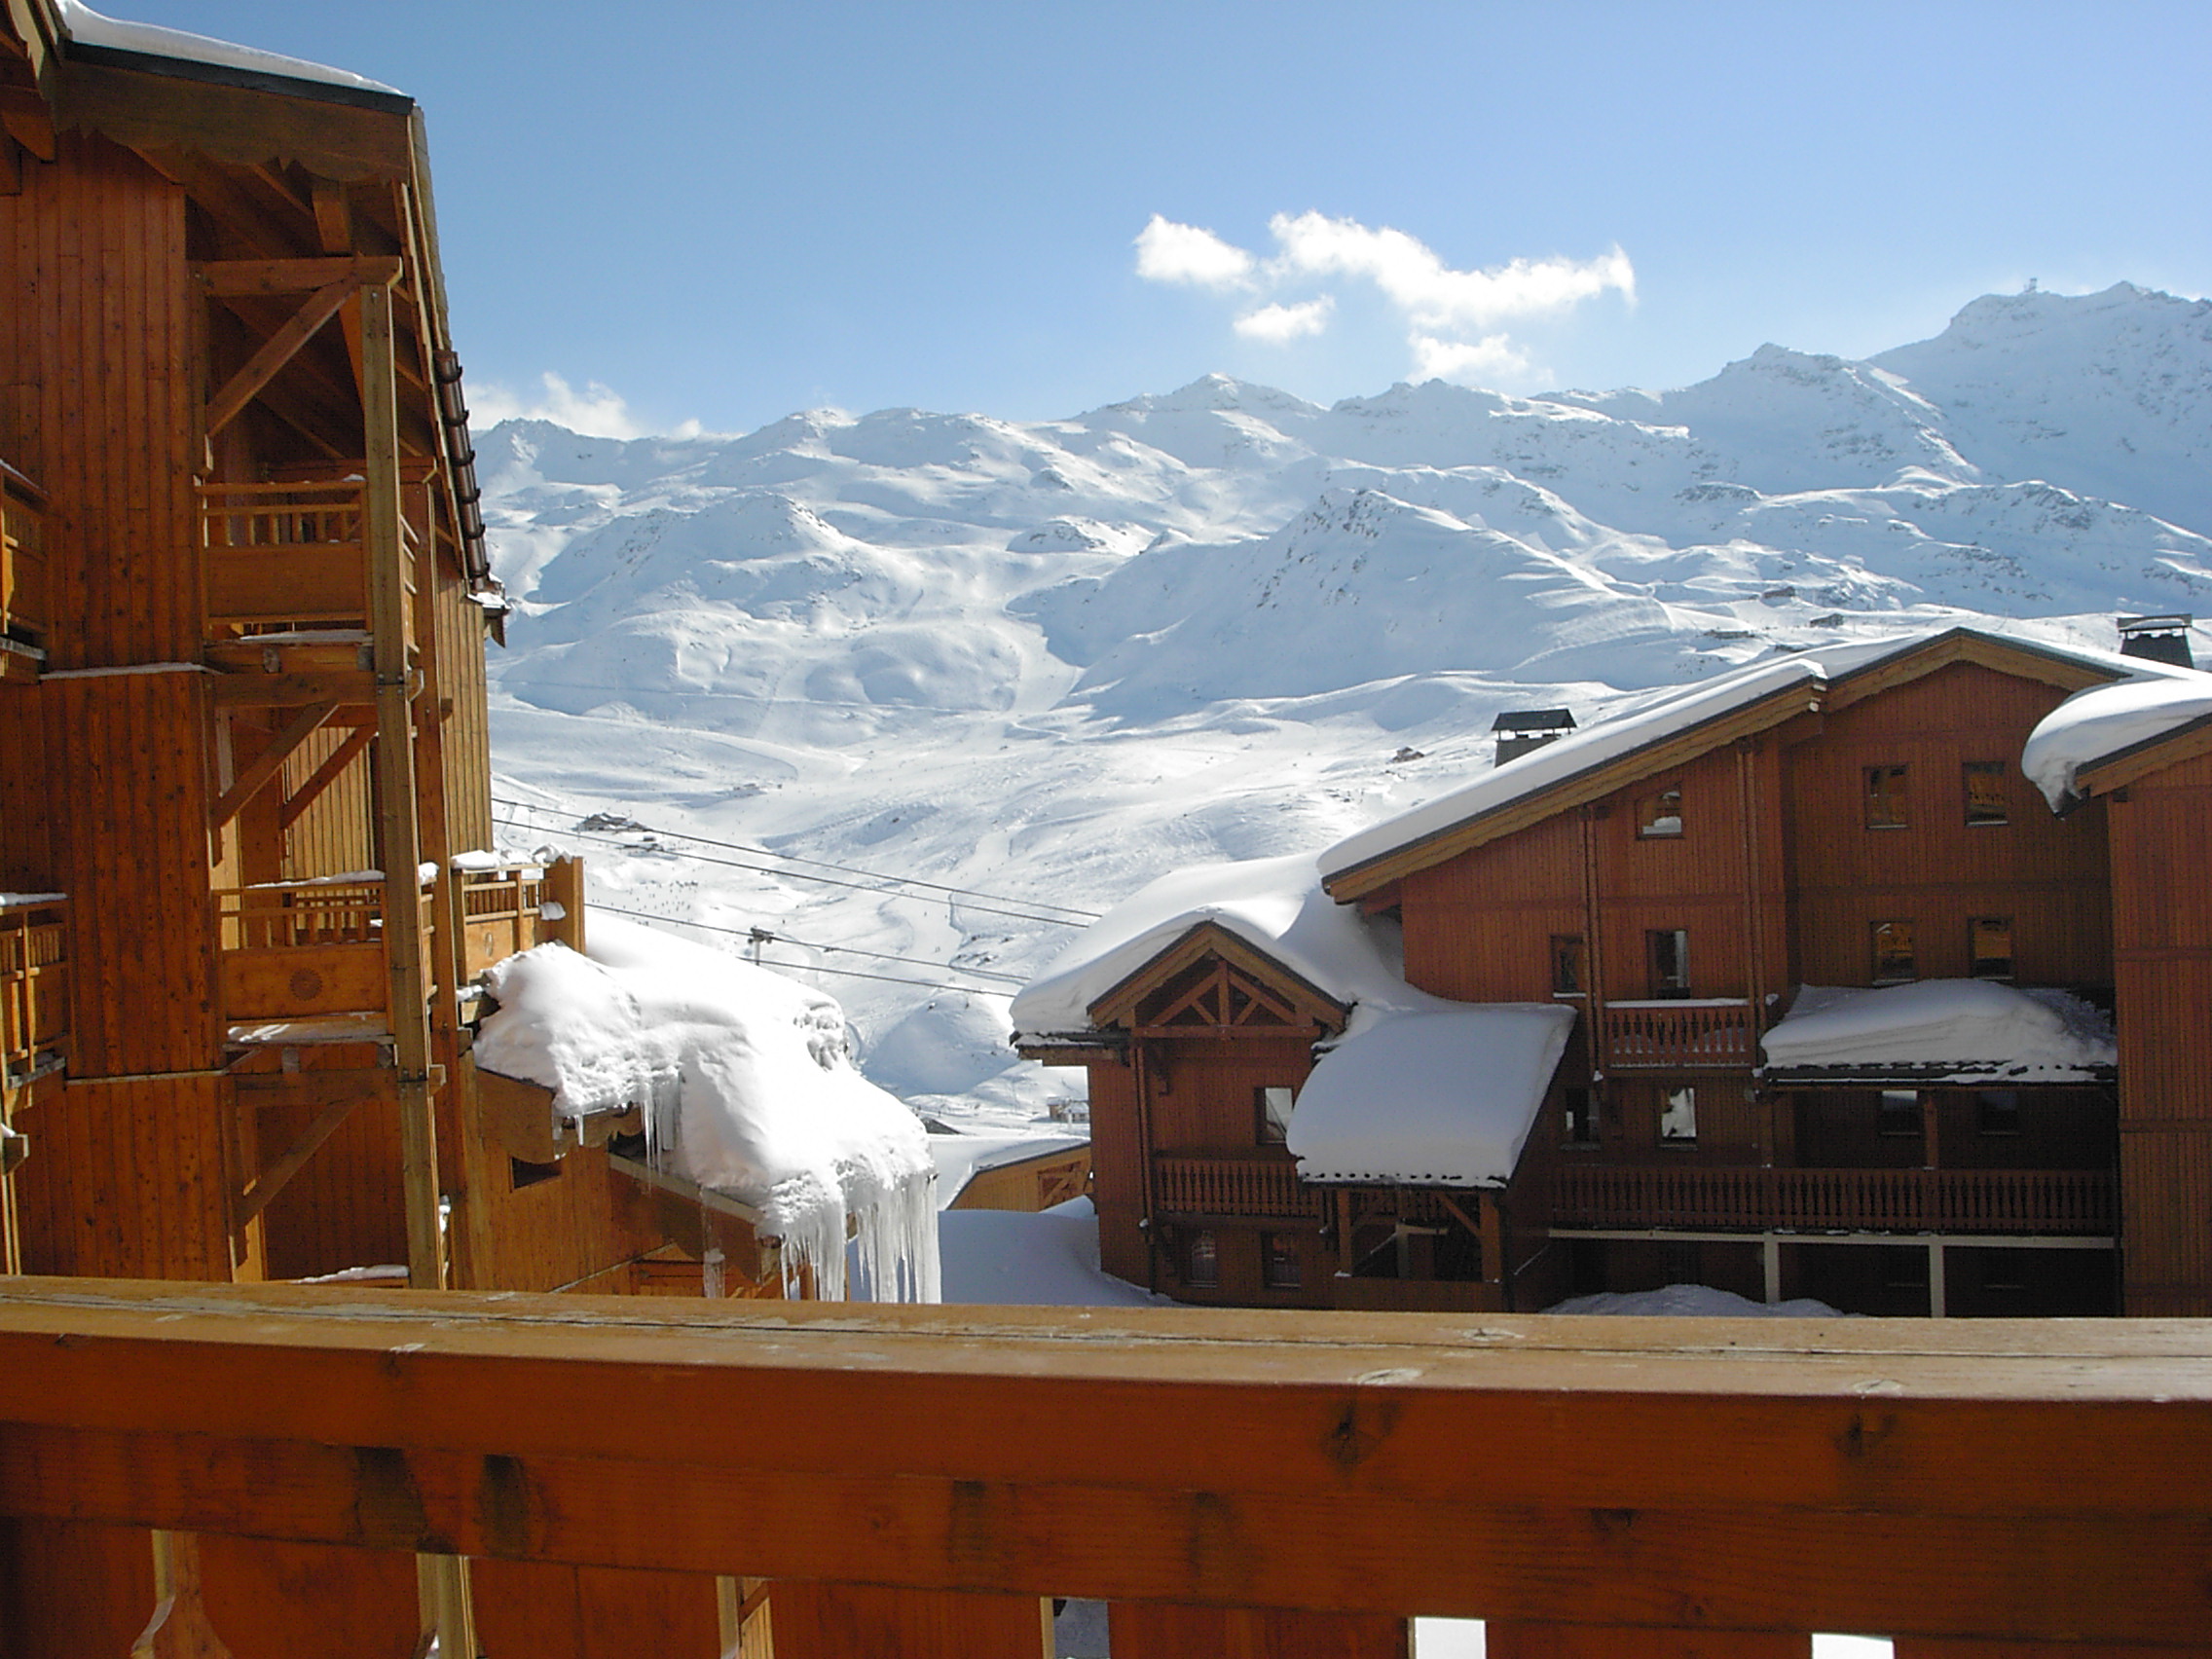 leon architecture exteriors winter alps chalet chalets house houses wood wooden mountain mountains snow wintersports